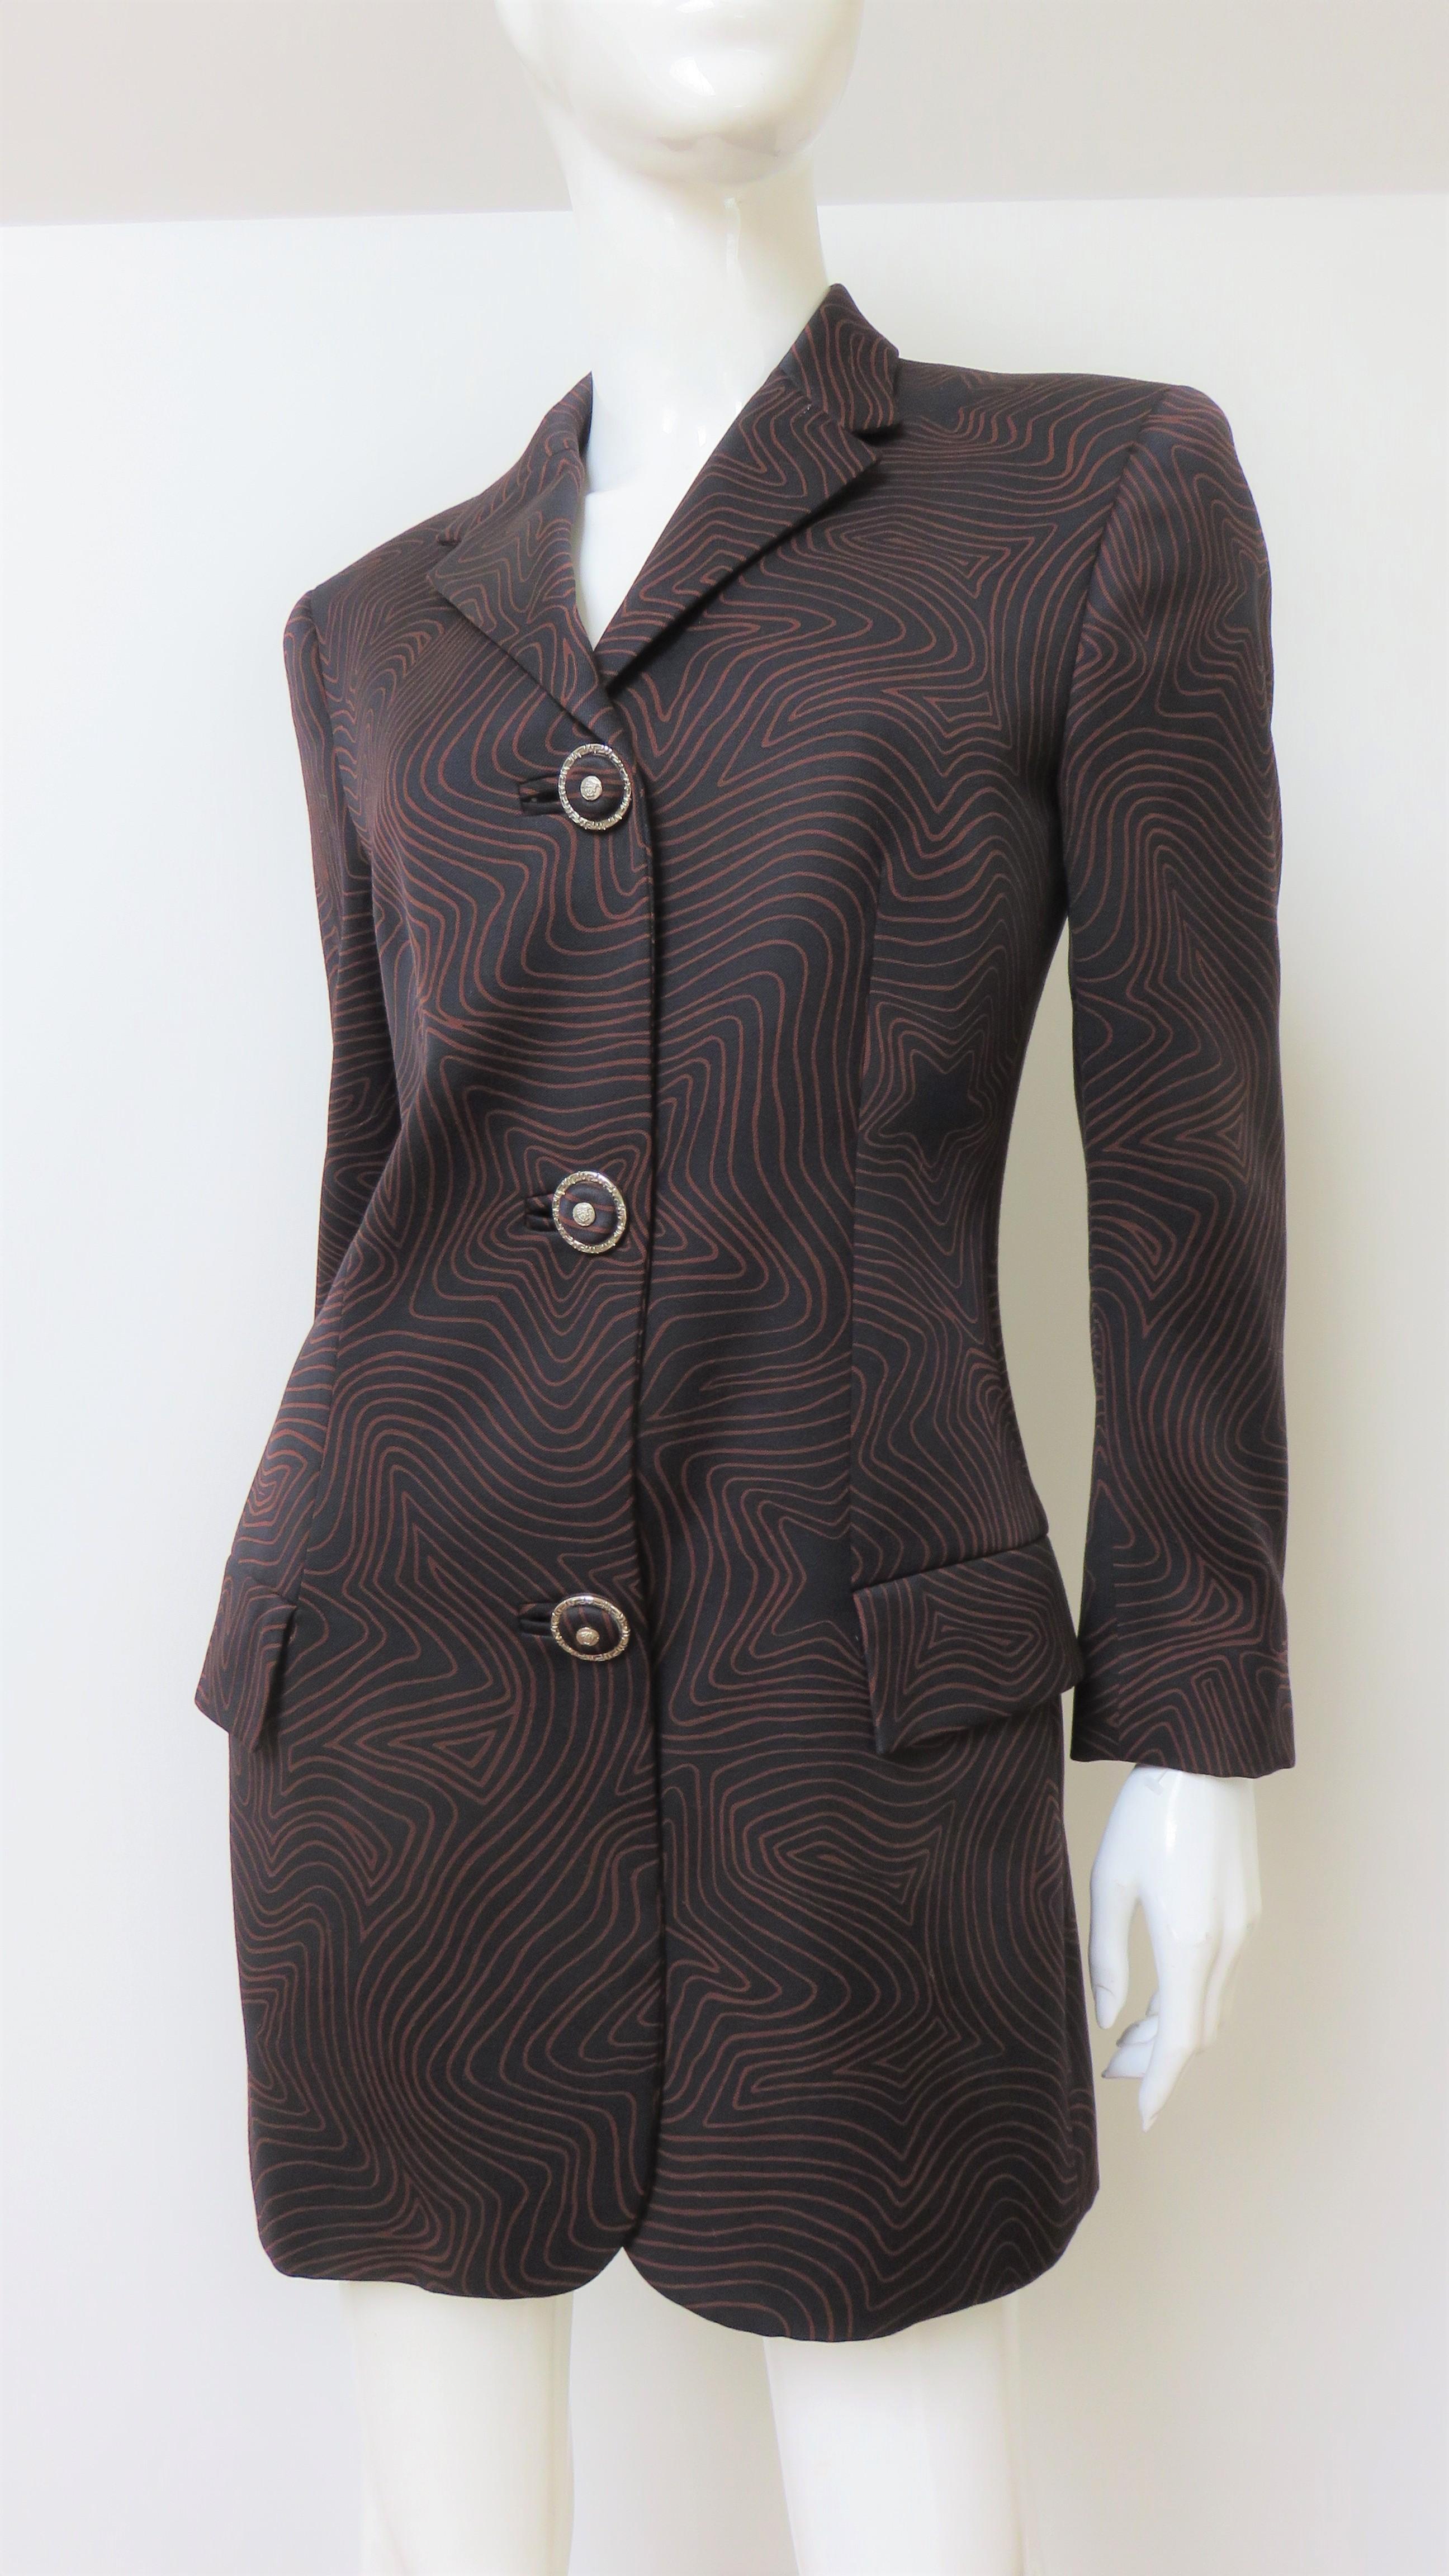 A fabulous black silk jacket with a brown line star pattern from Gianni Versace Couture.  It is a long blazer style jacket with incredible elaborate matching buttons and bound buttonholes closing the front and on the cuffs.  It has 2 front flap